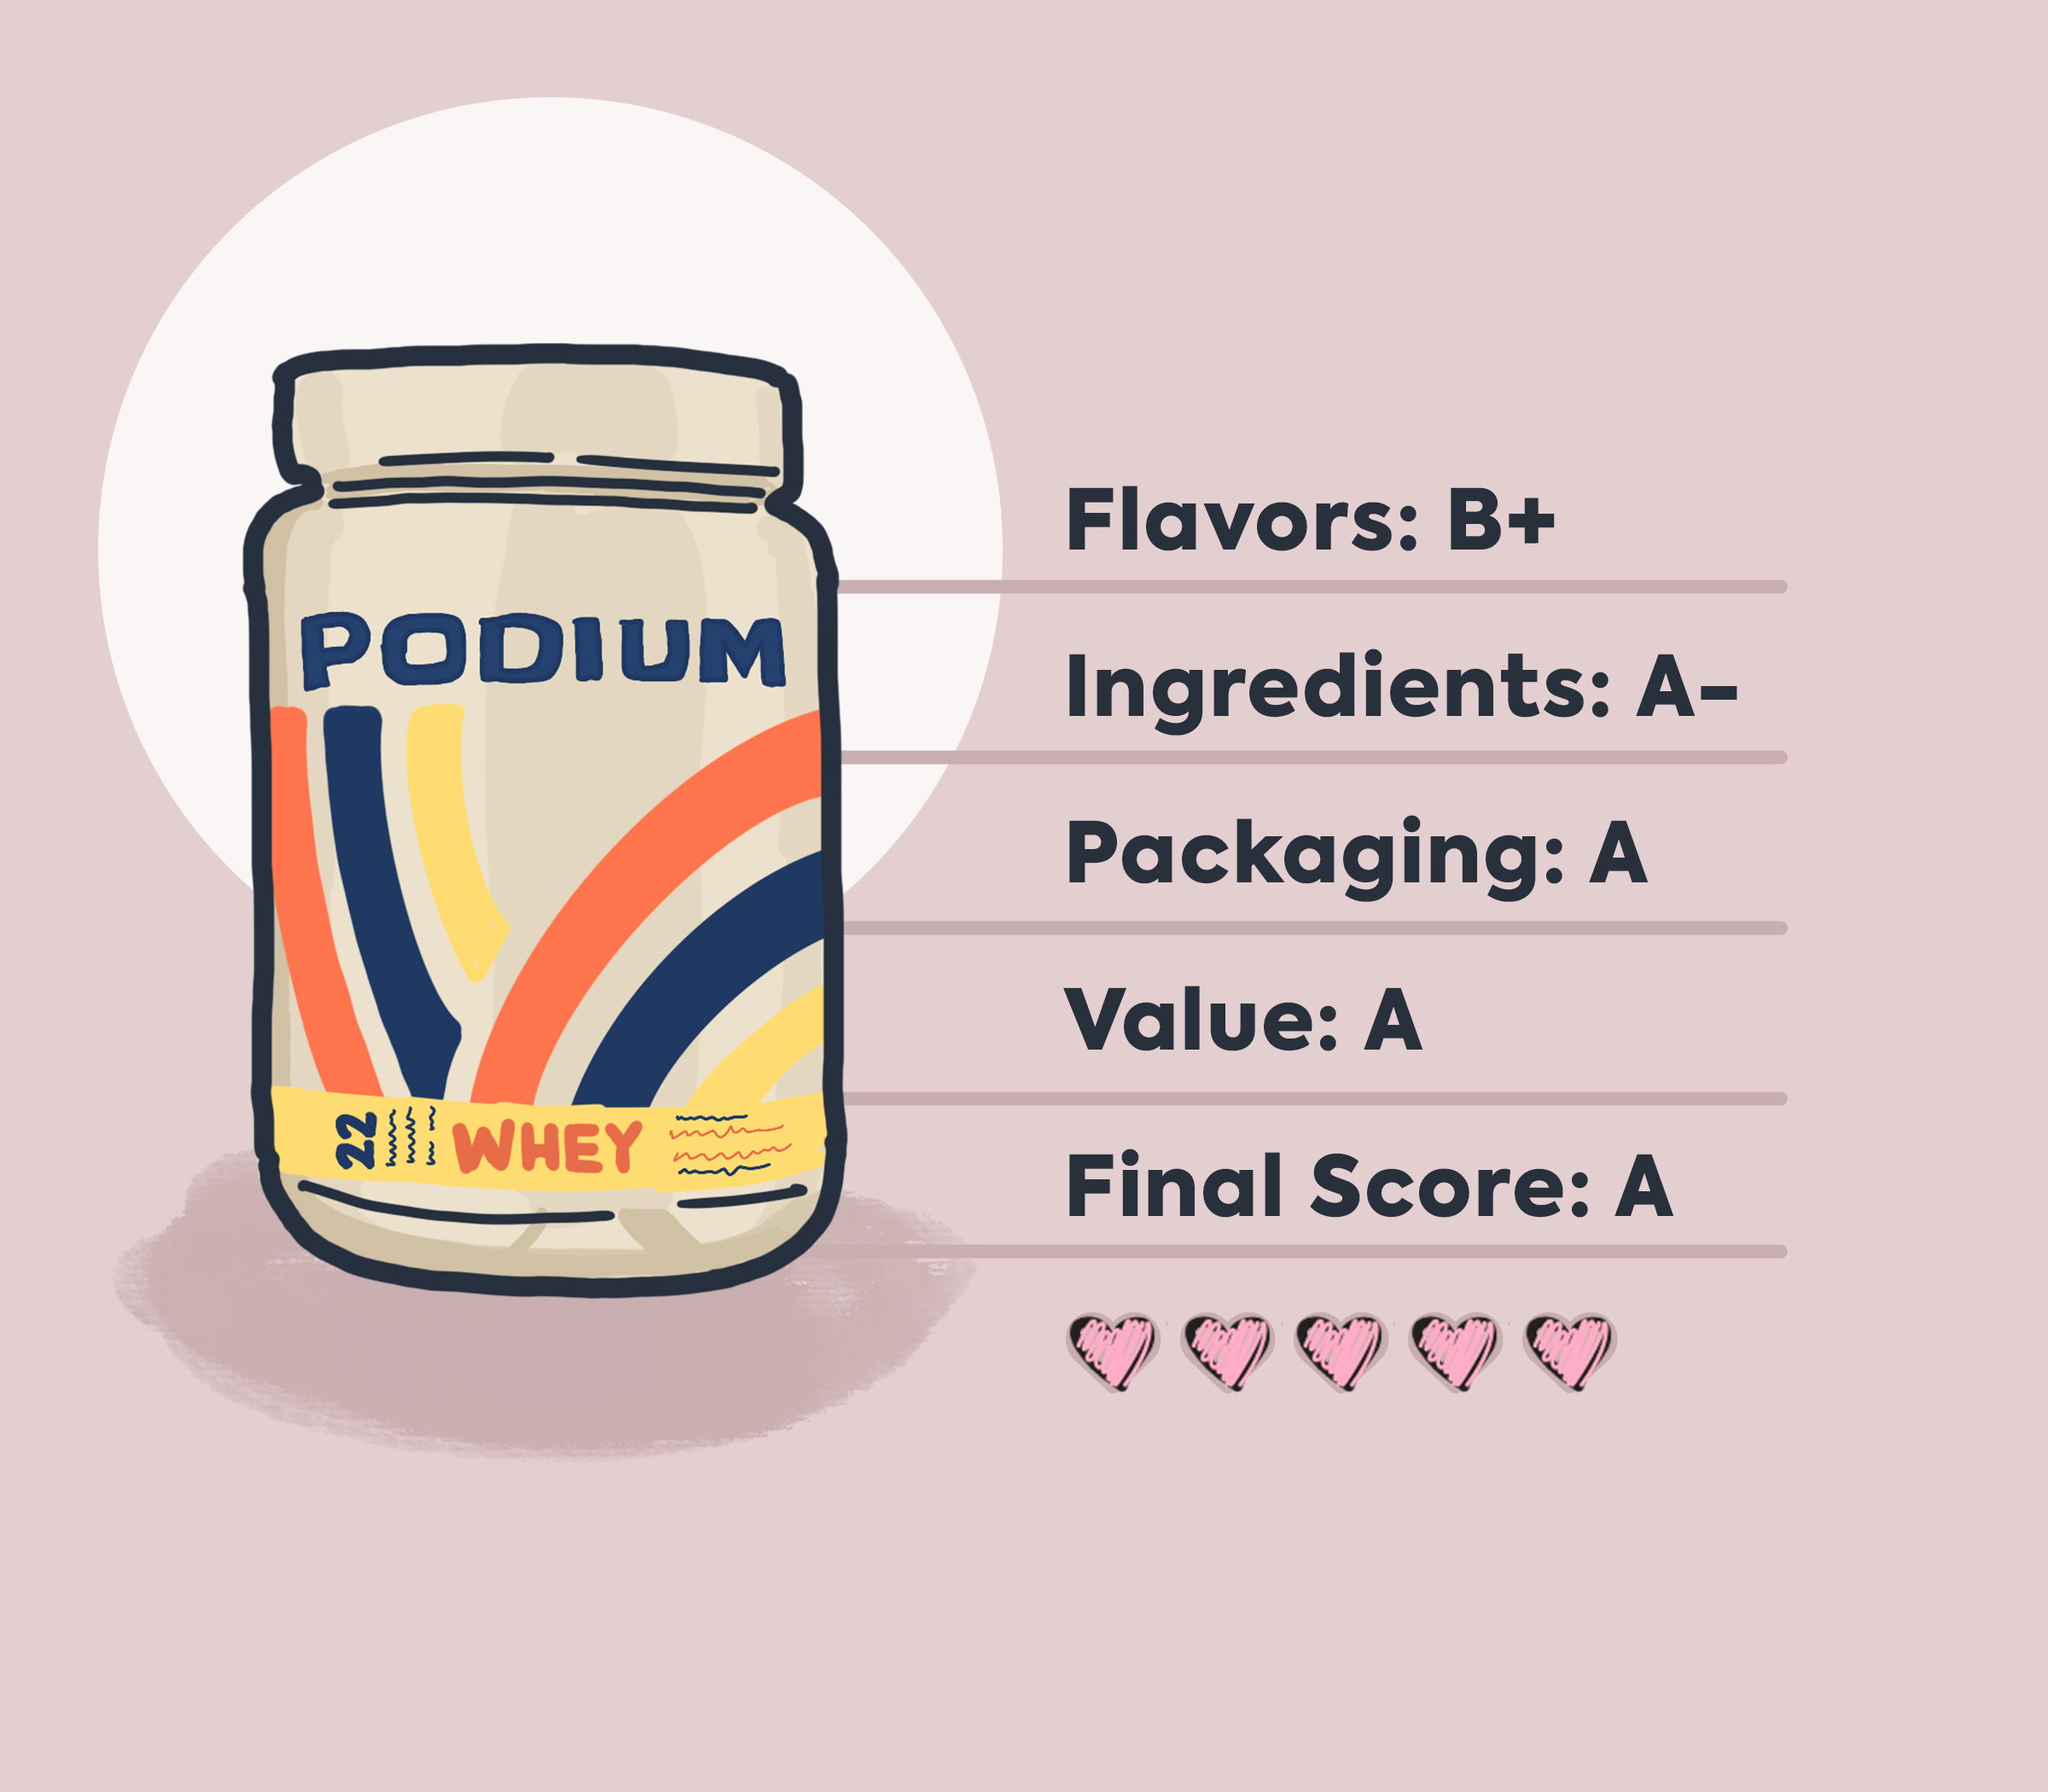 podium whey protein illustrated graphic with review information on pink background